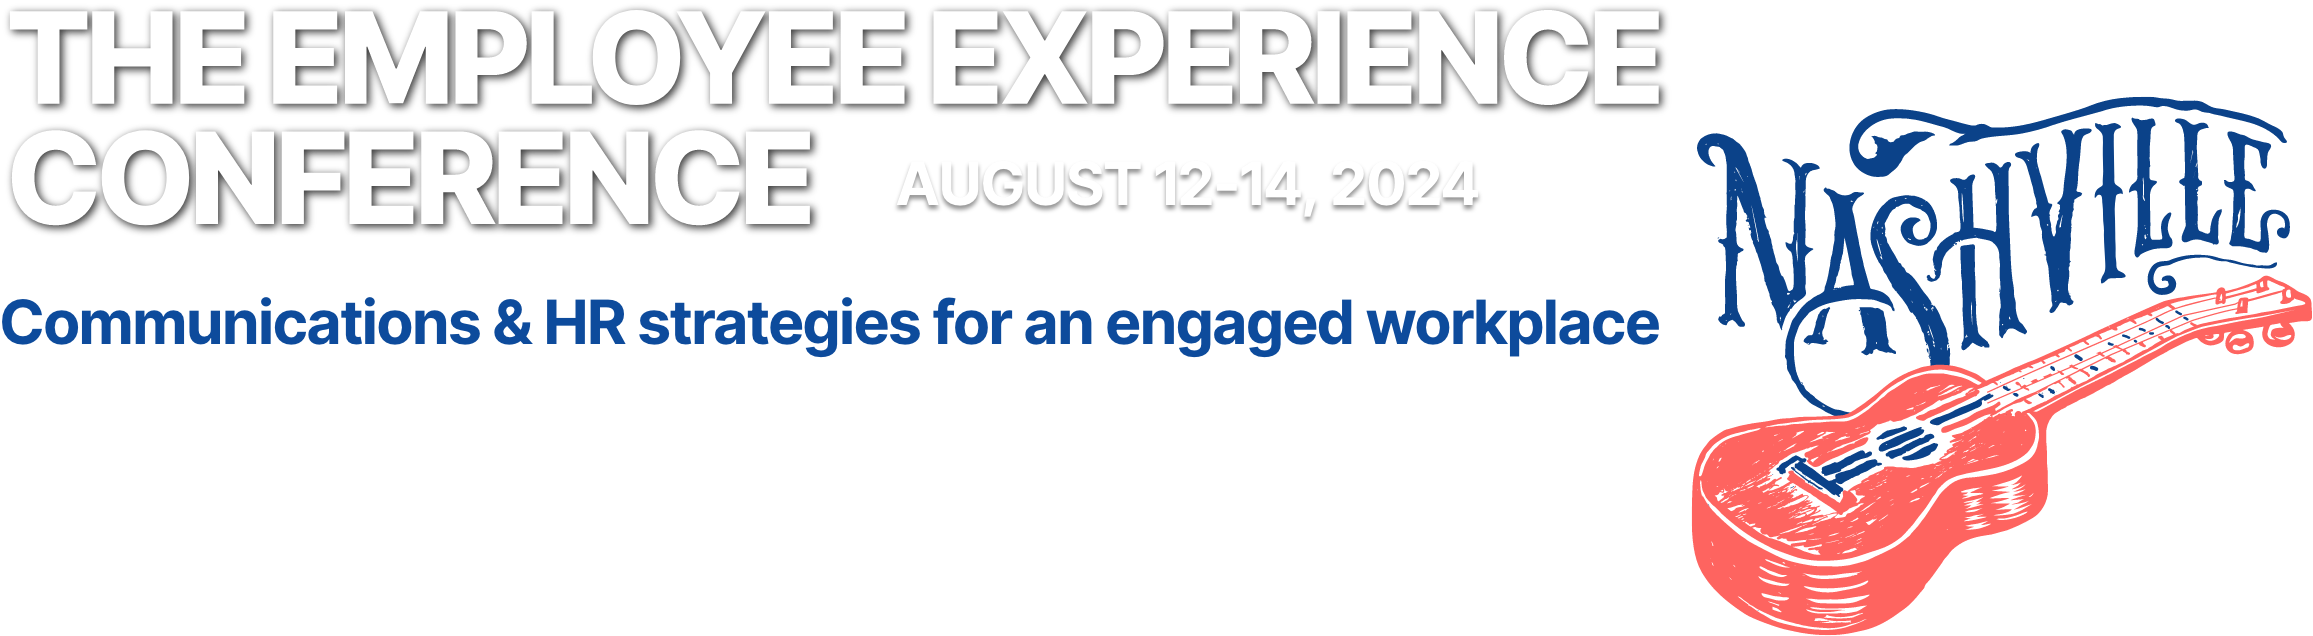 The Employee Experience Conference | August 12-14, 2024,  Nashville, TN